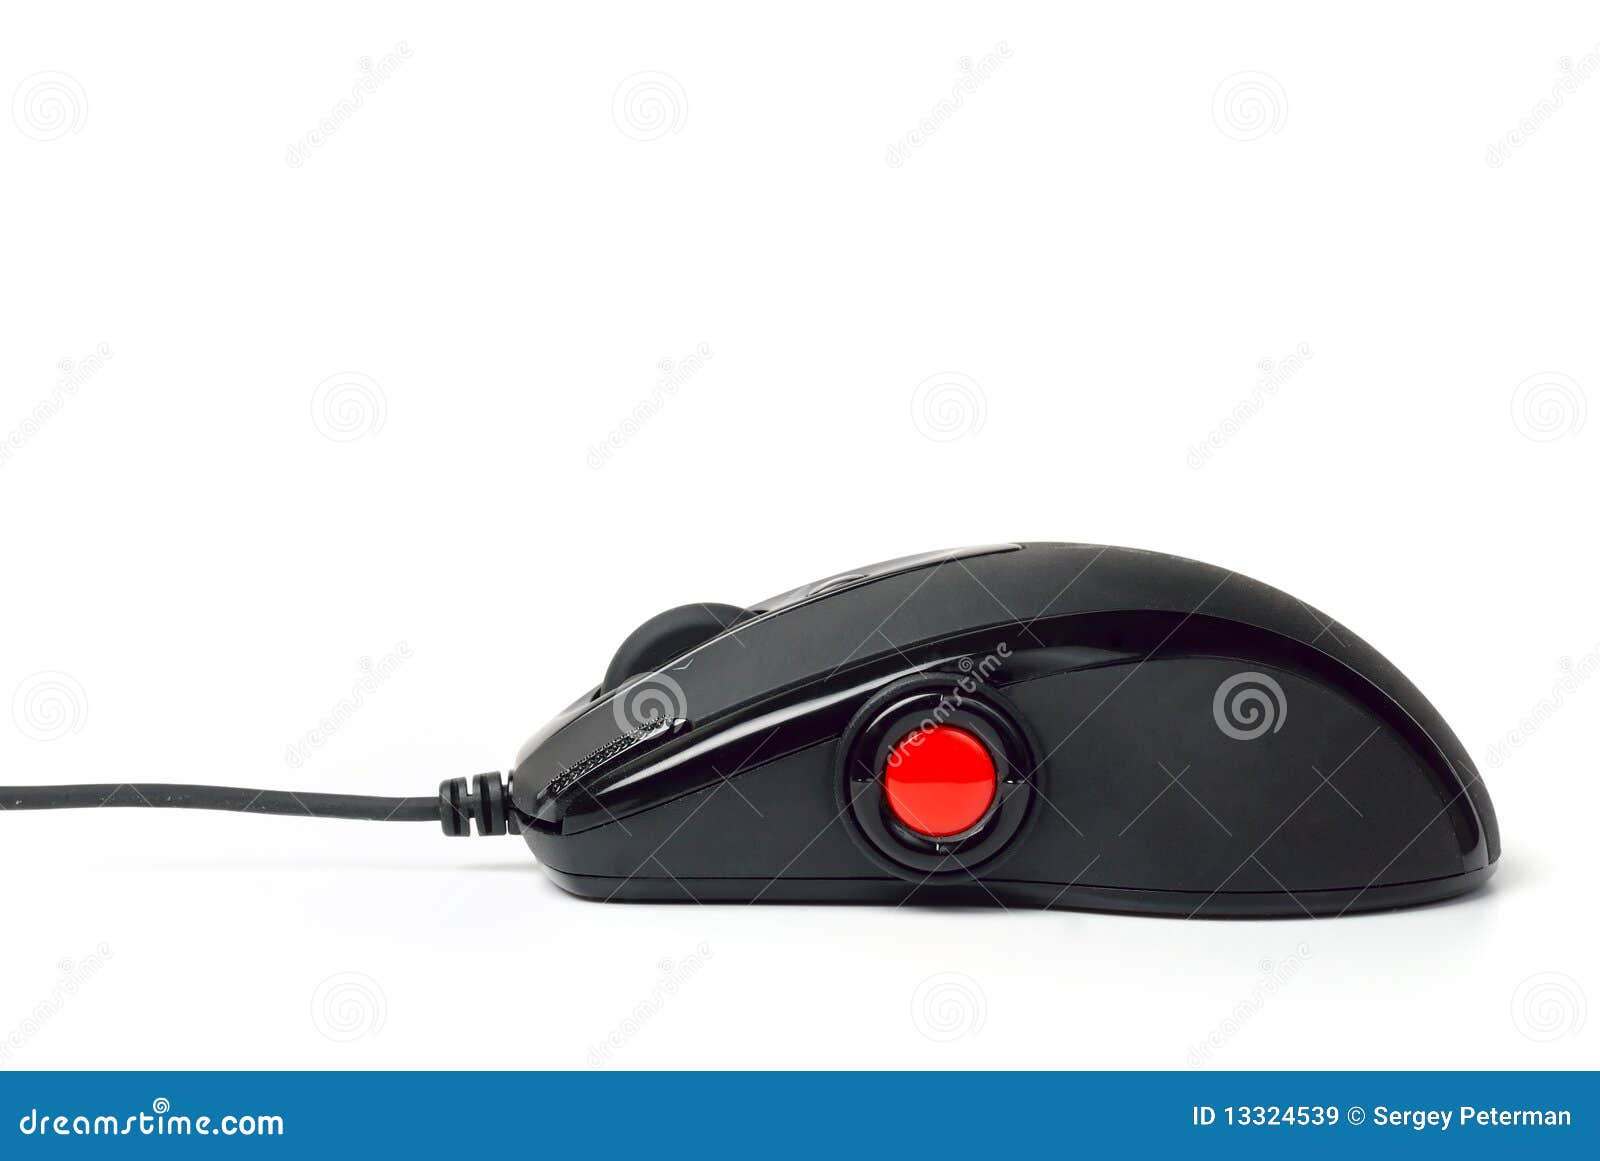 zone Joke town Modern wired mouse stock image. Image of wired, technology - 13324539